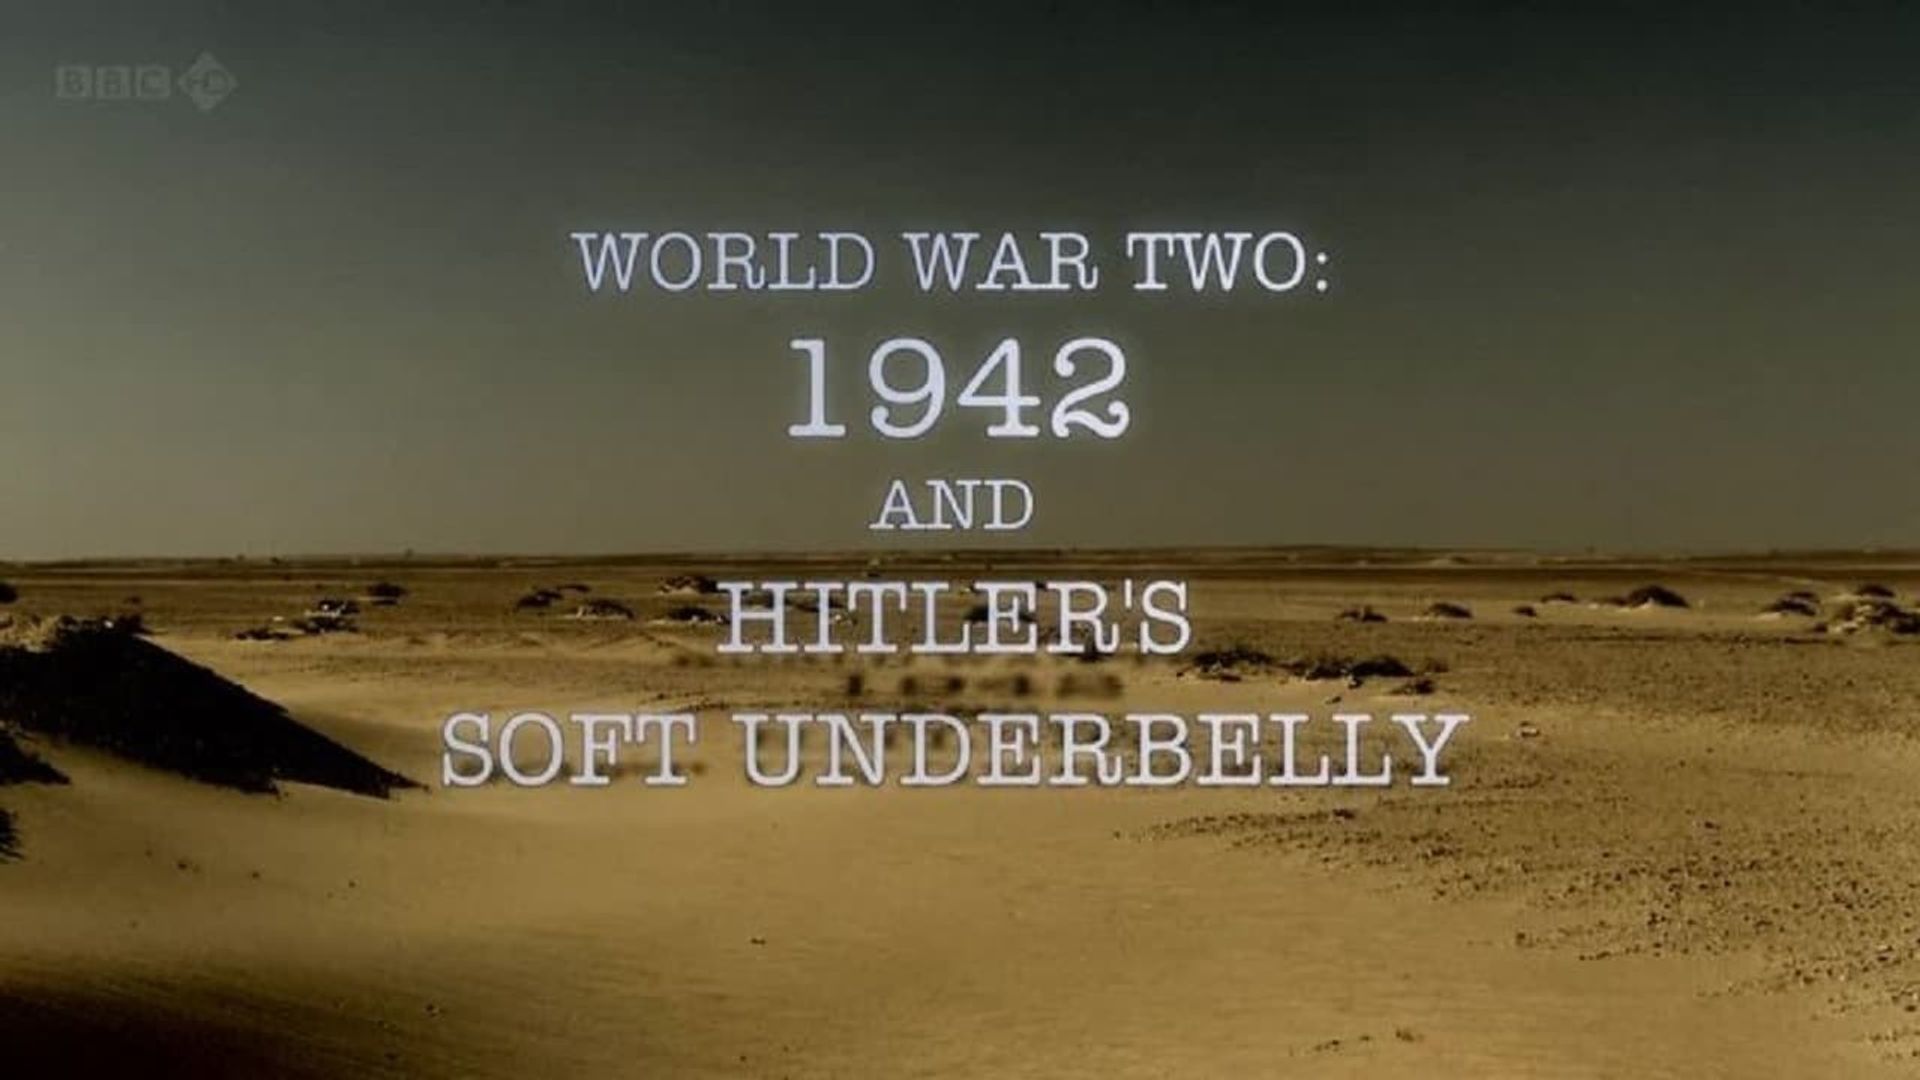 World War Two: 1942 and Hitler's Soft Underbelly Backdrop